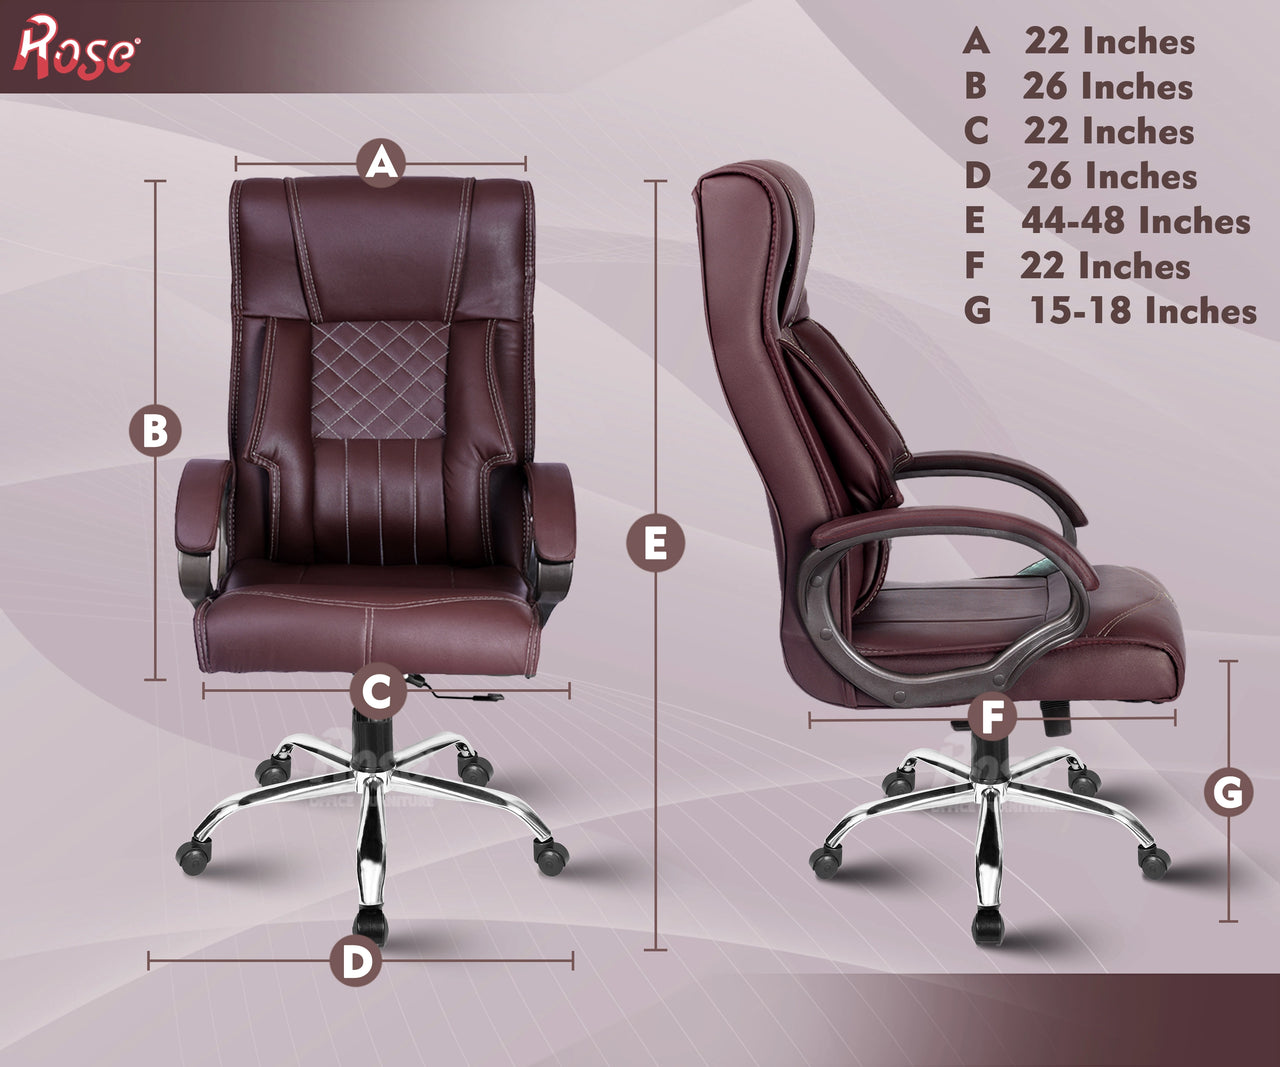 Iran Leatherette Executive Mid Back/High Back Revolving Office Chair (Brown, High Back)